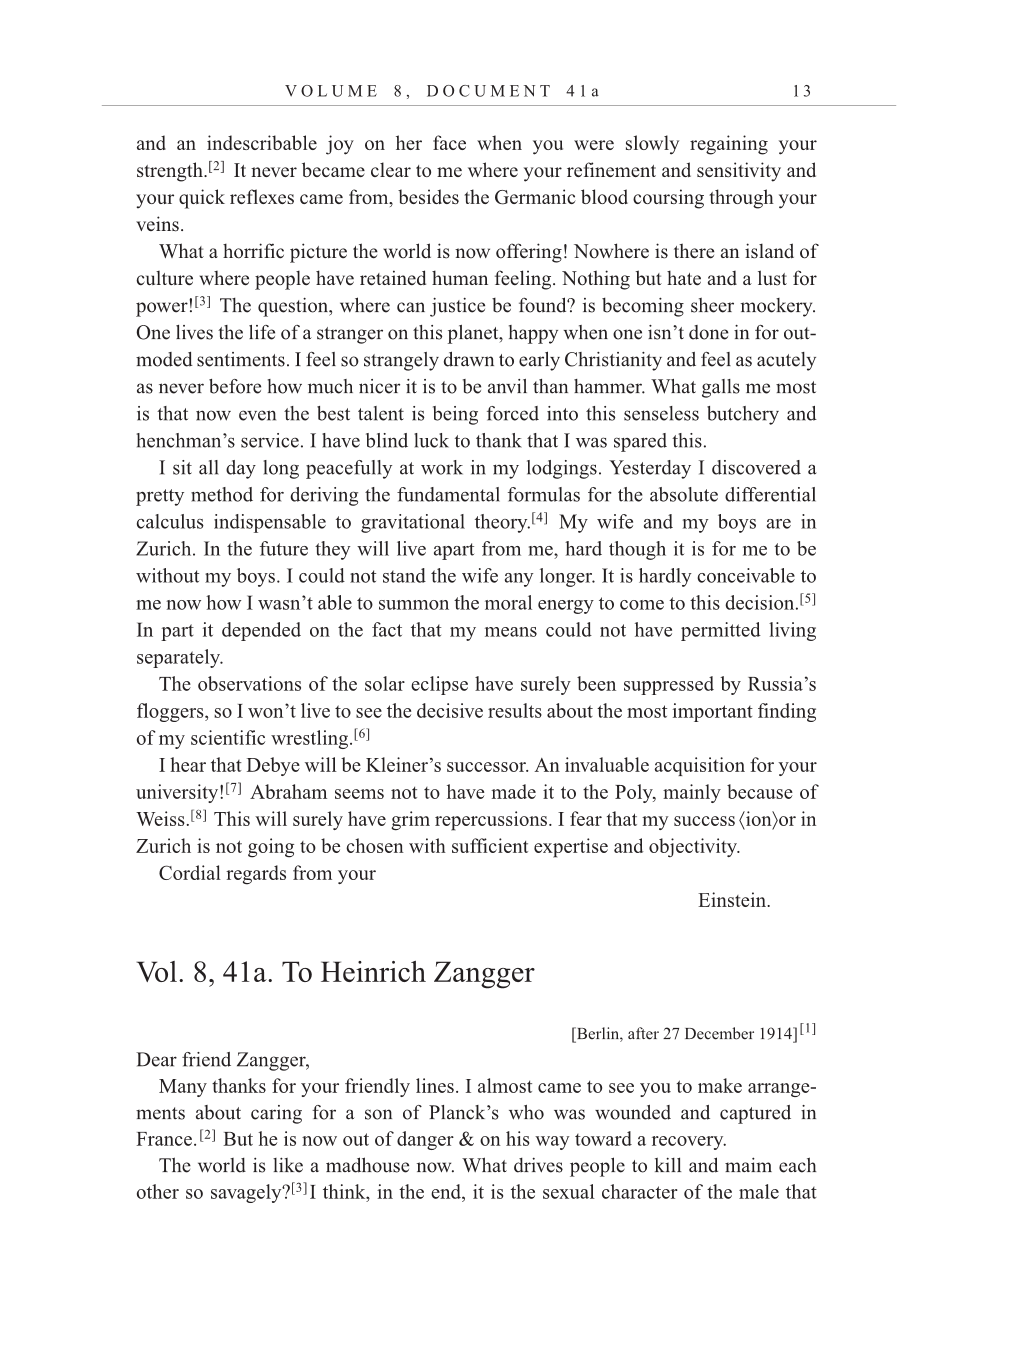 Volume 10: The Berlin Years: Correspondence, May-December 1920, and Supplementary Correspondence, 1909-1920 (English translation supplement) page 13